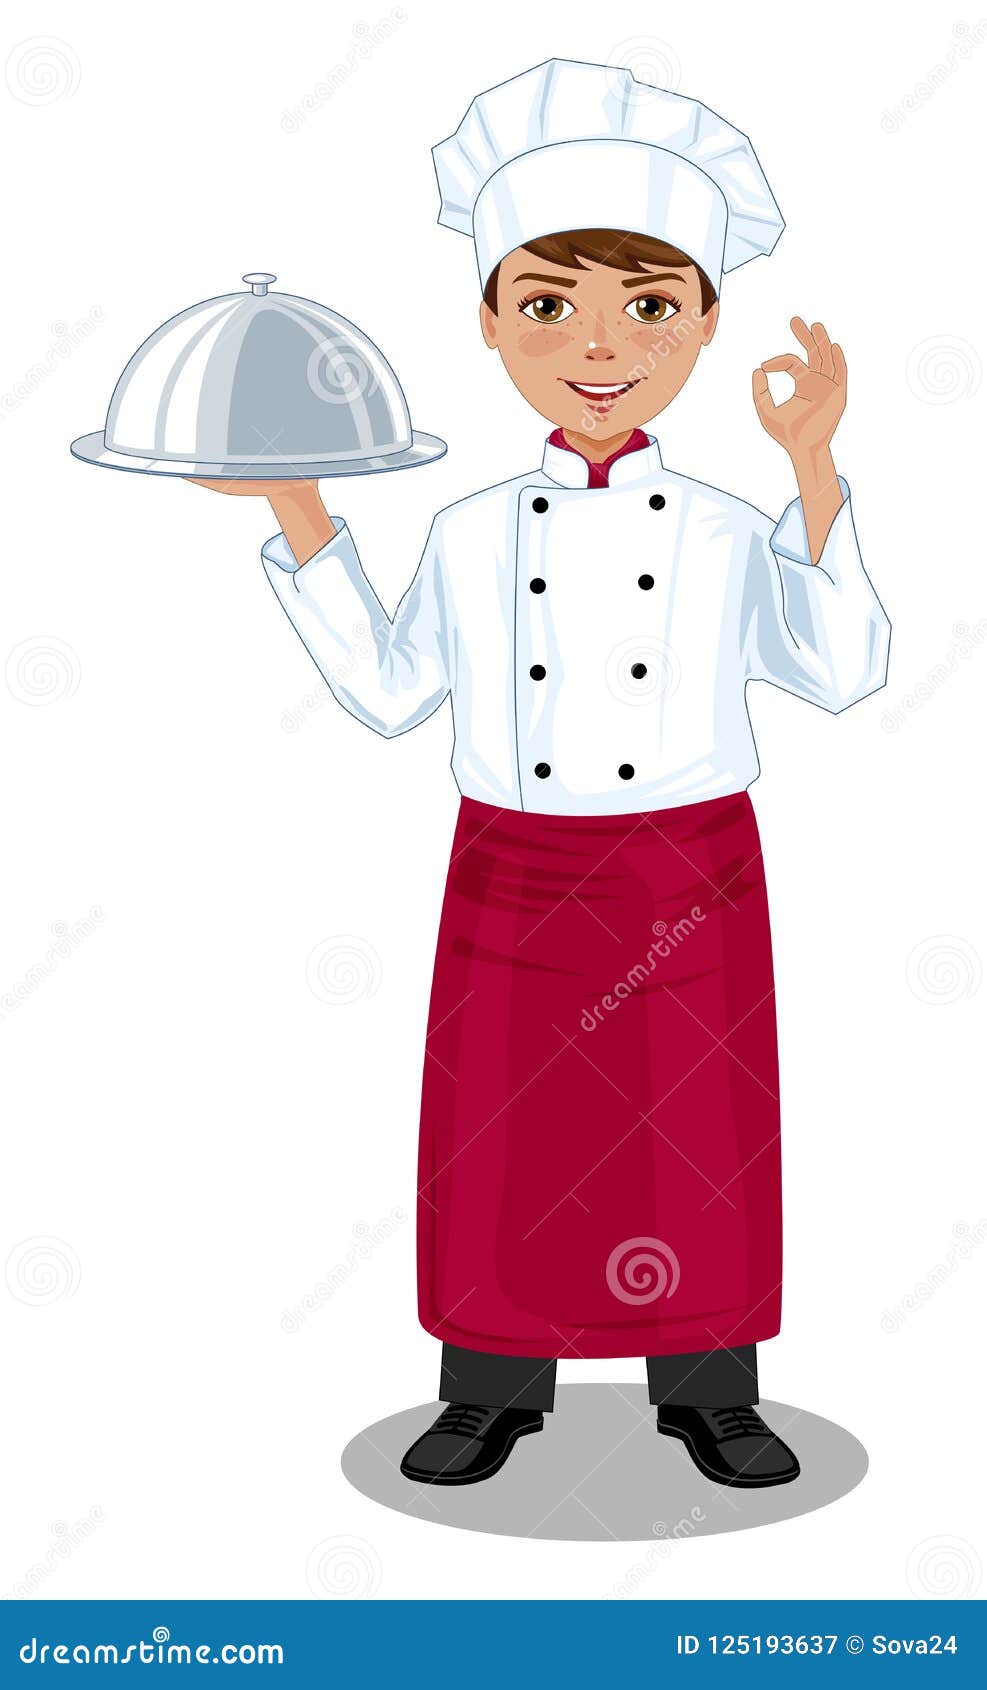 Chef stock vector. Illustration of character, plate - 125193637